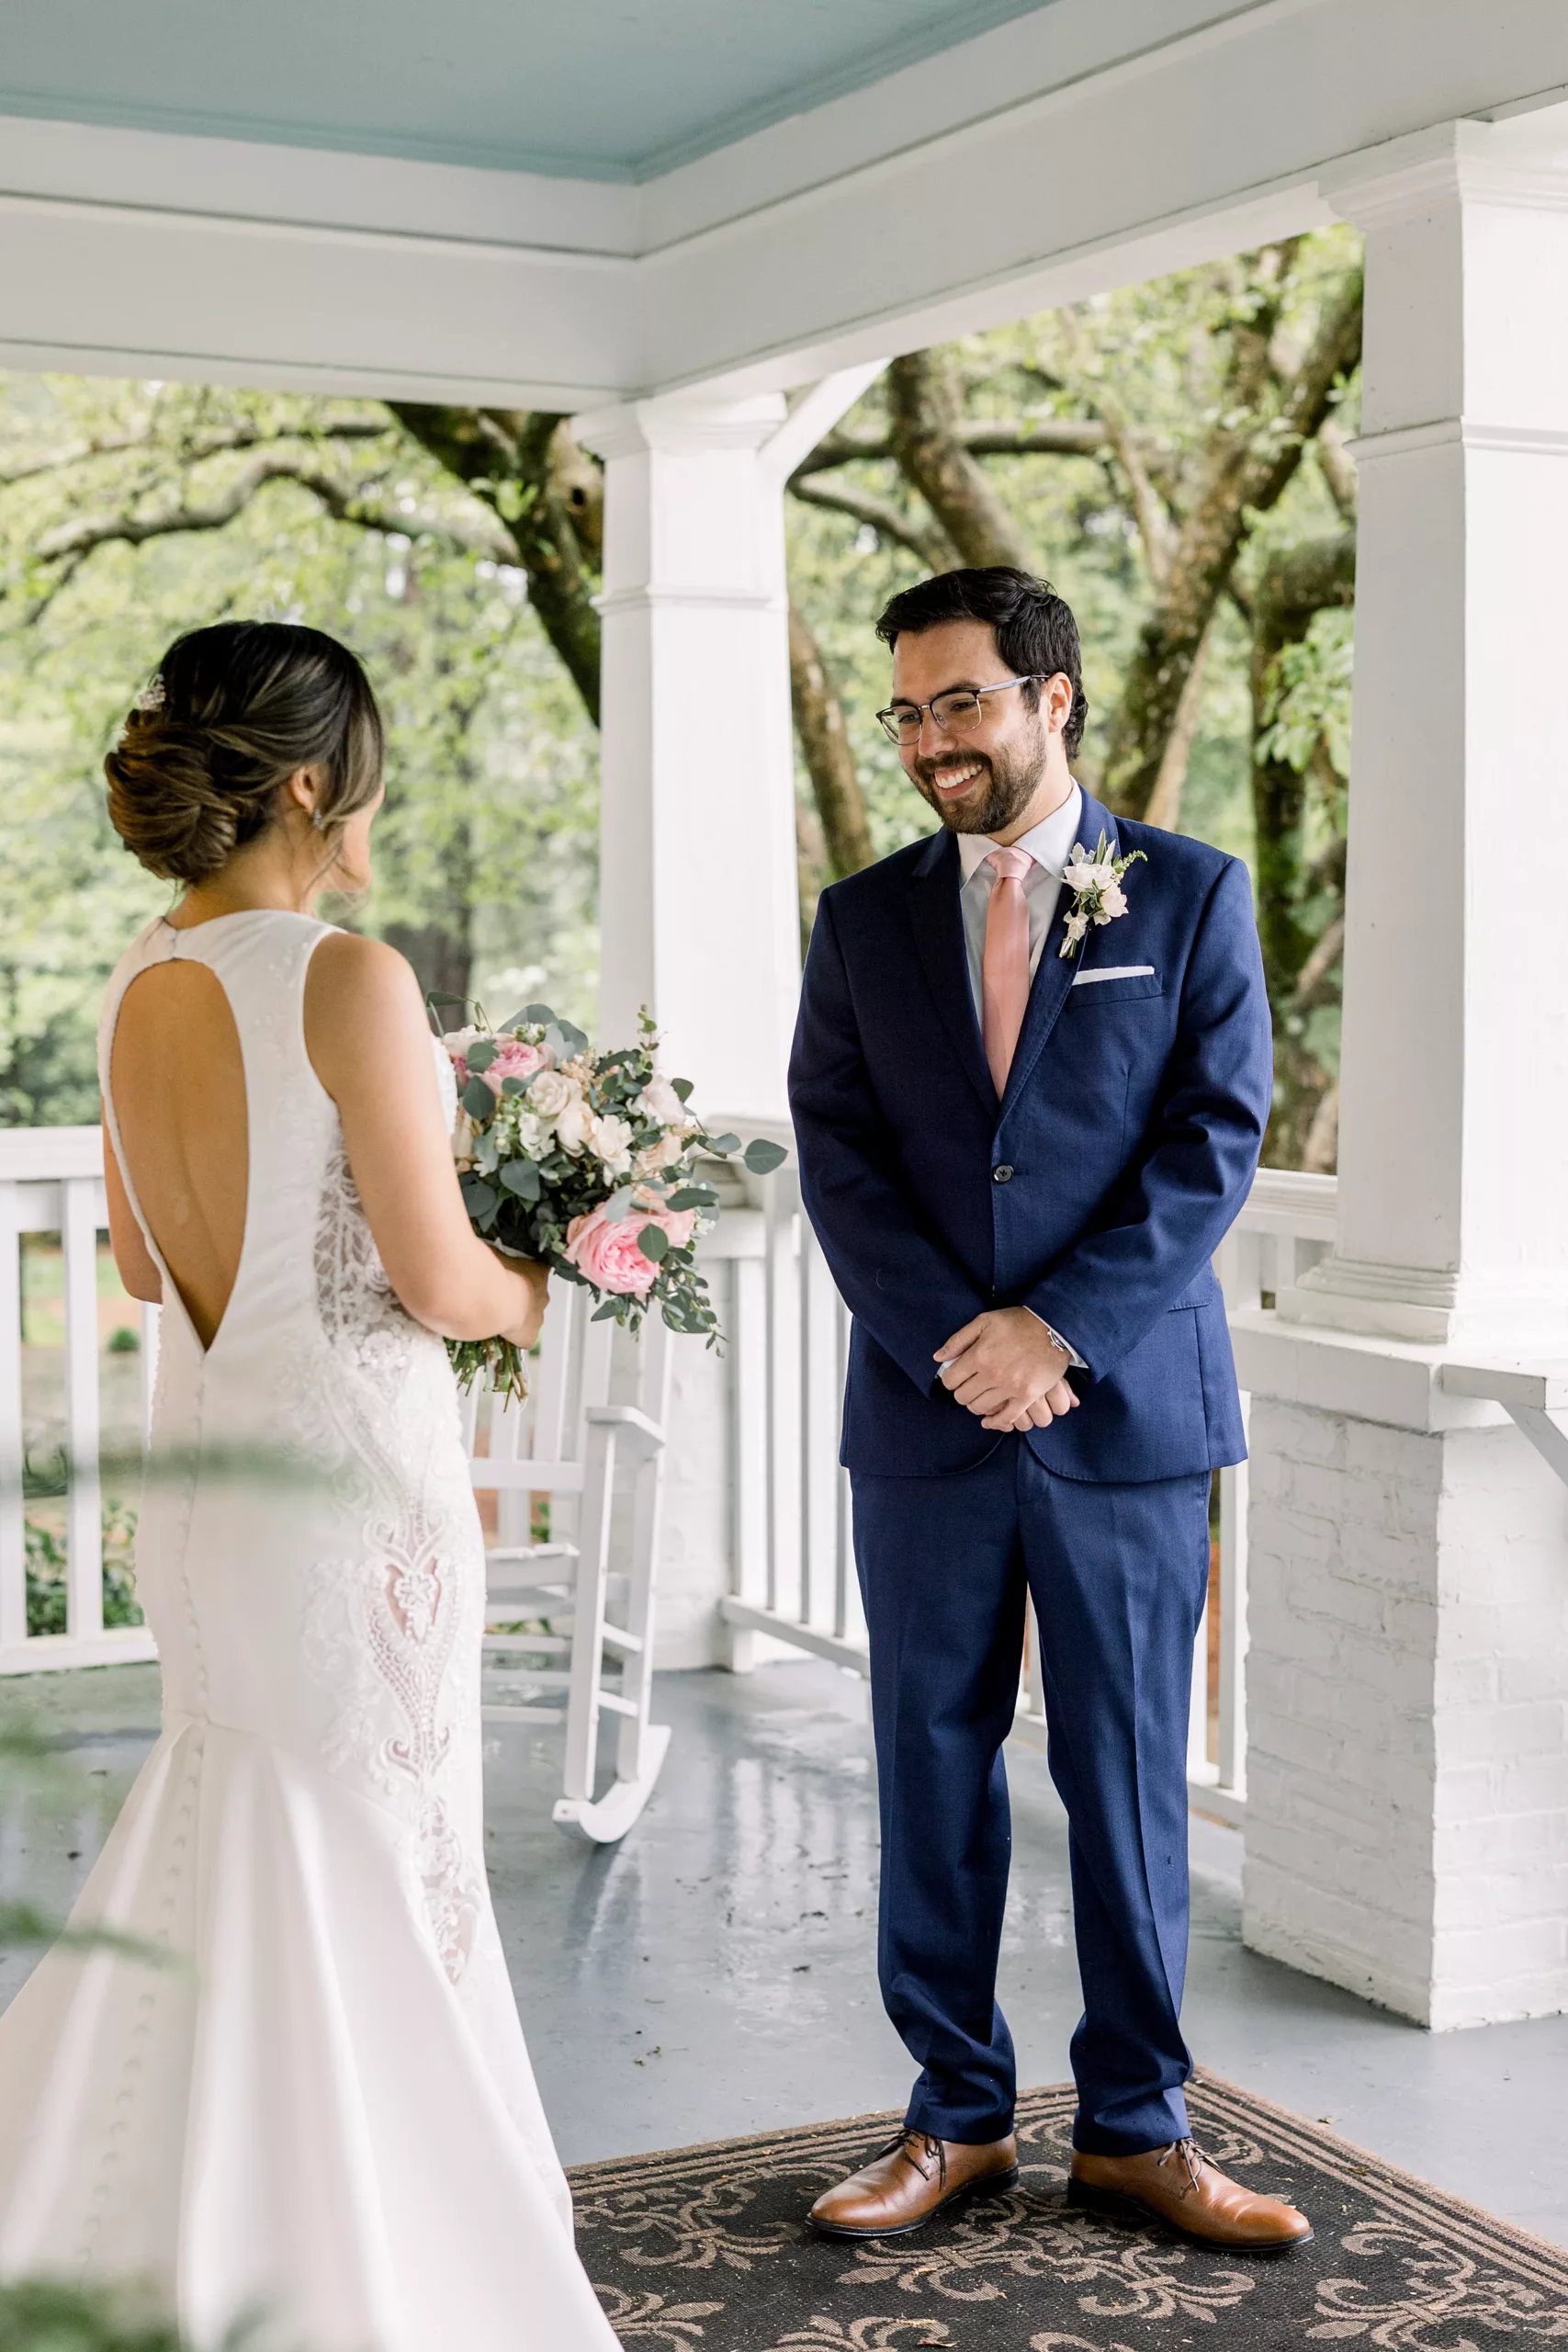 A groom stands with hands crossed smiling at his bride as he sees her for the first time on a porch during their first look wedding